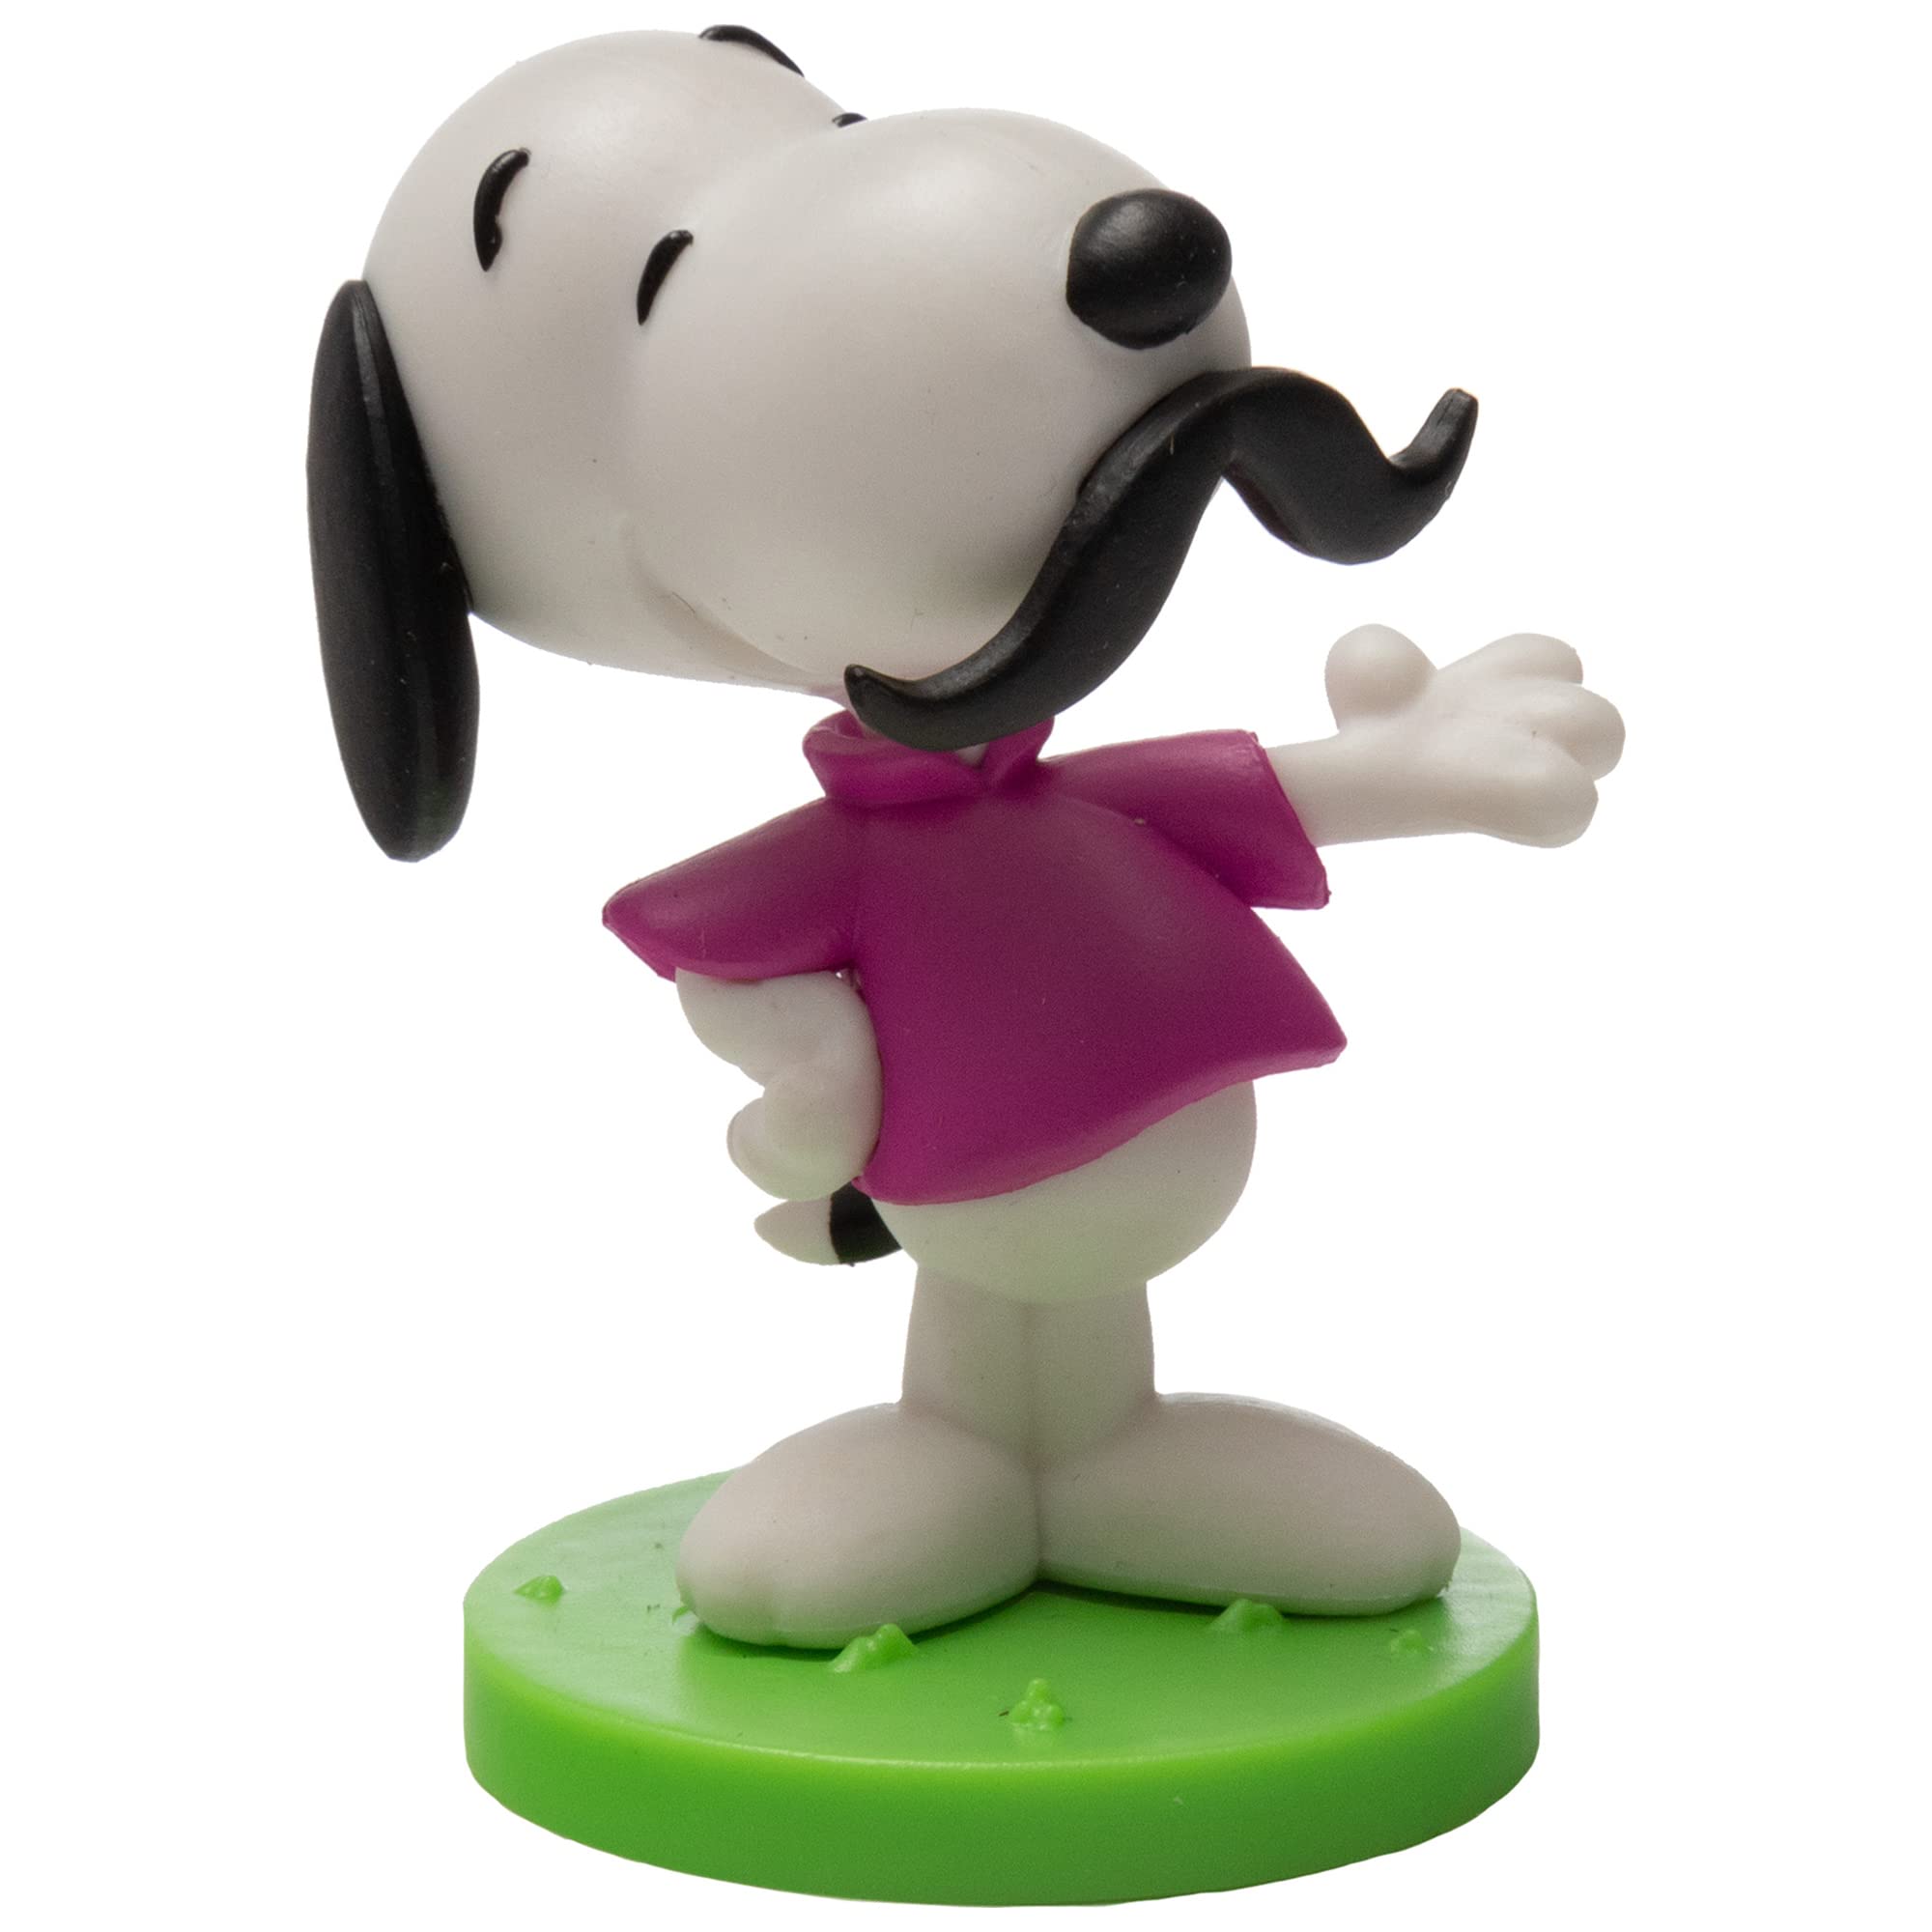 JINX Snoopy in Space Adventure Figures Toy (Receive One of Four Mystery Figures), 3.5-in Collectible Vinyl Sculpture from Apple TV+ Series for Fans Ages 6+